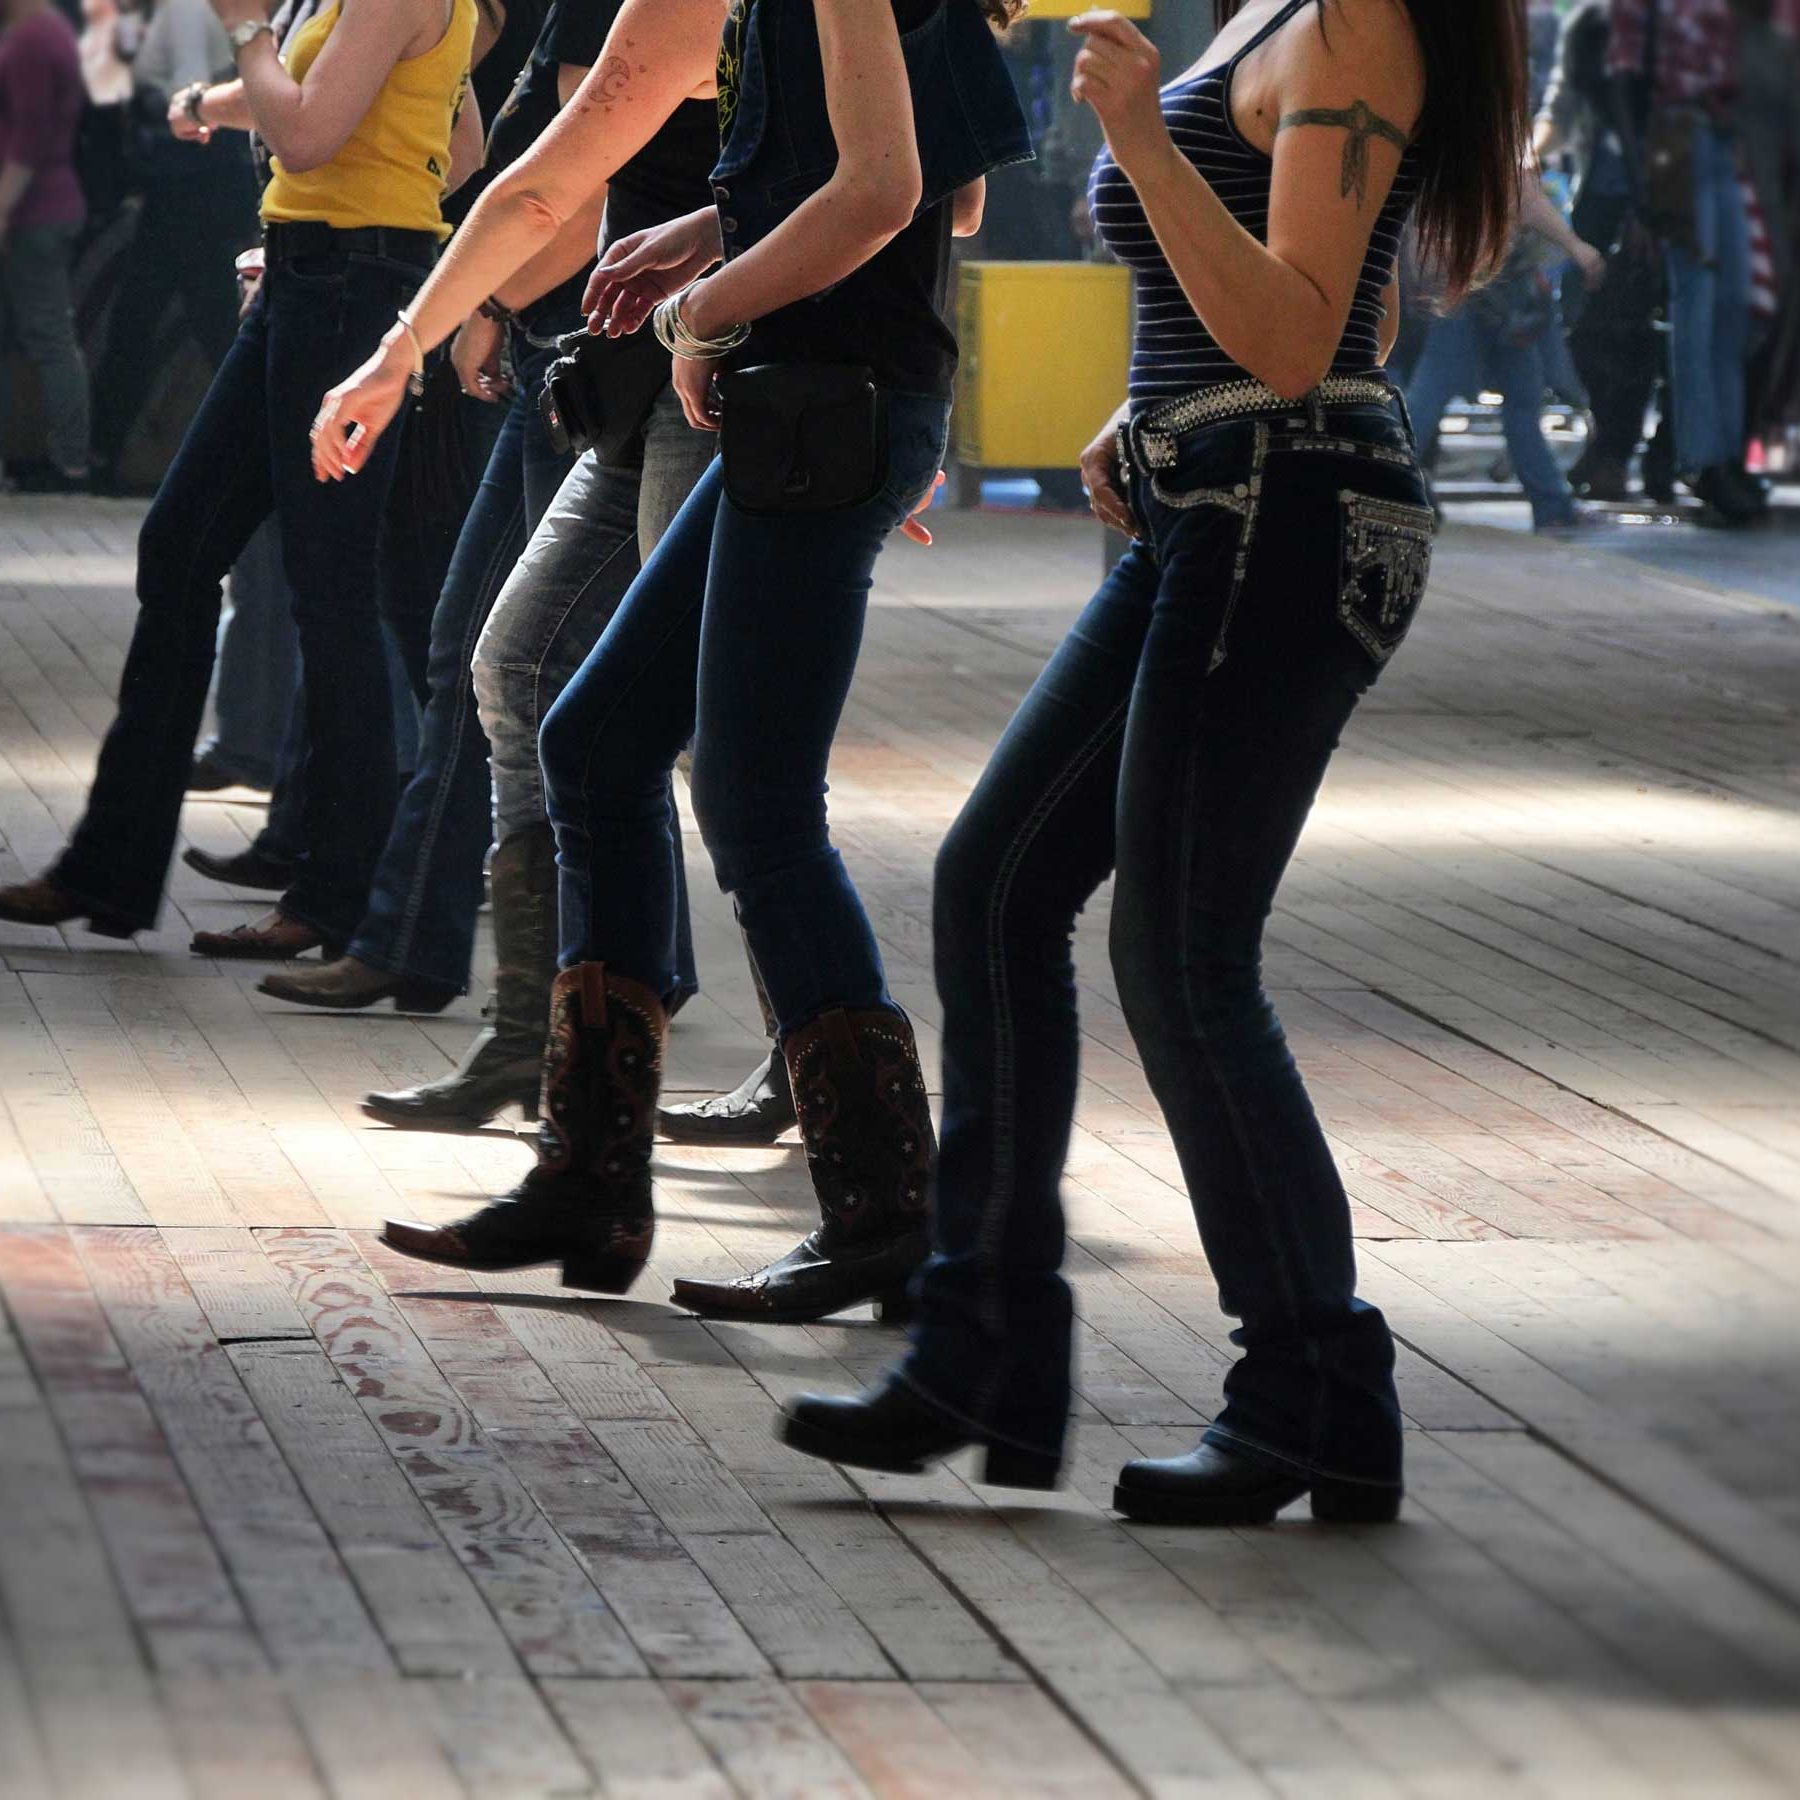 Country-Line-Dance-Class